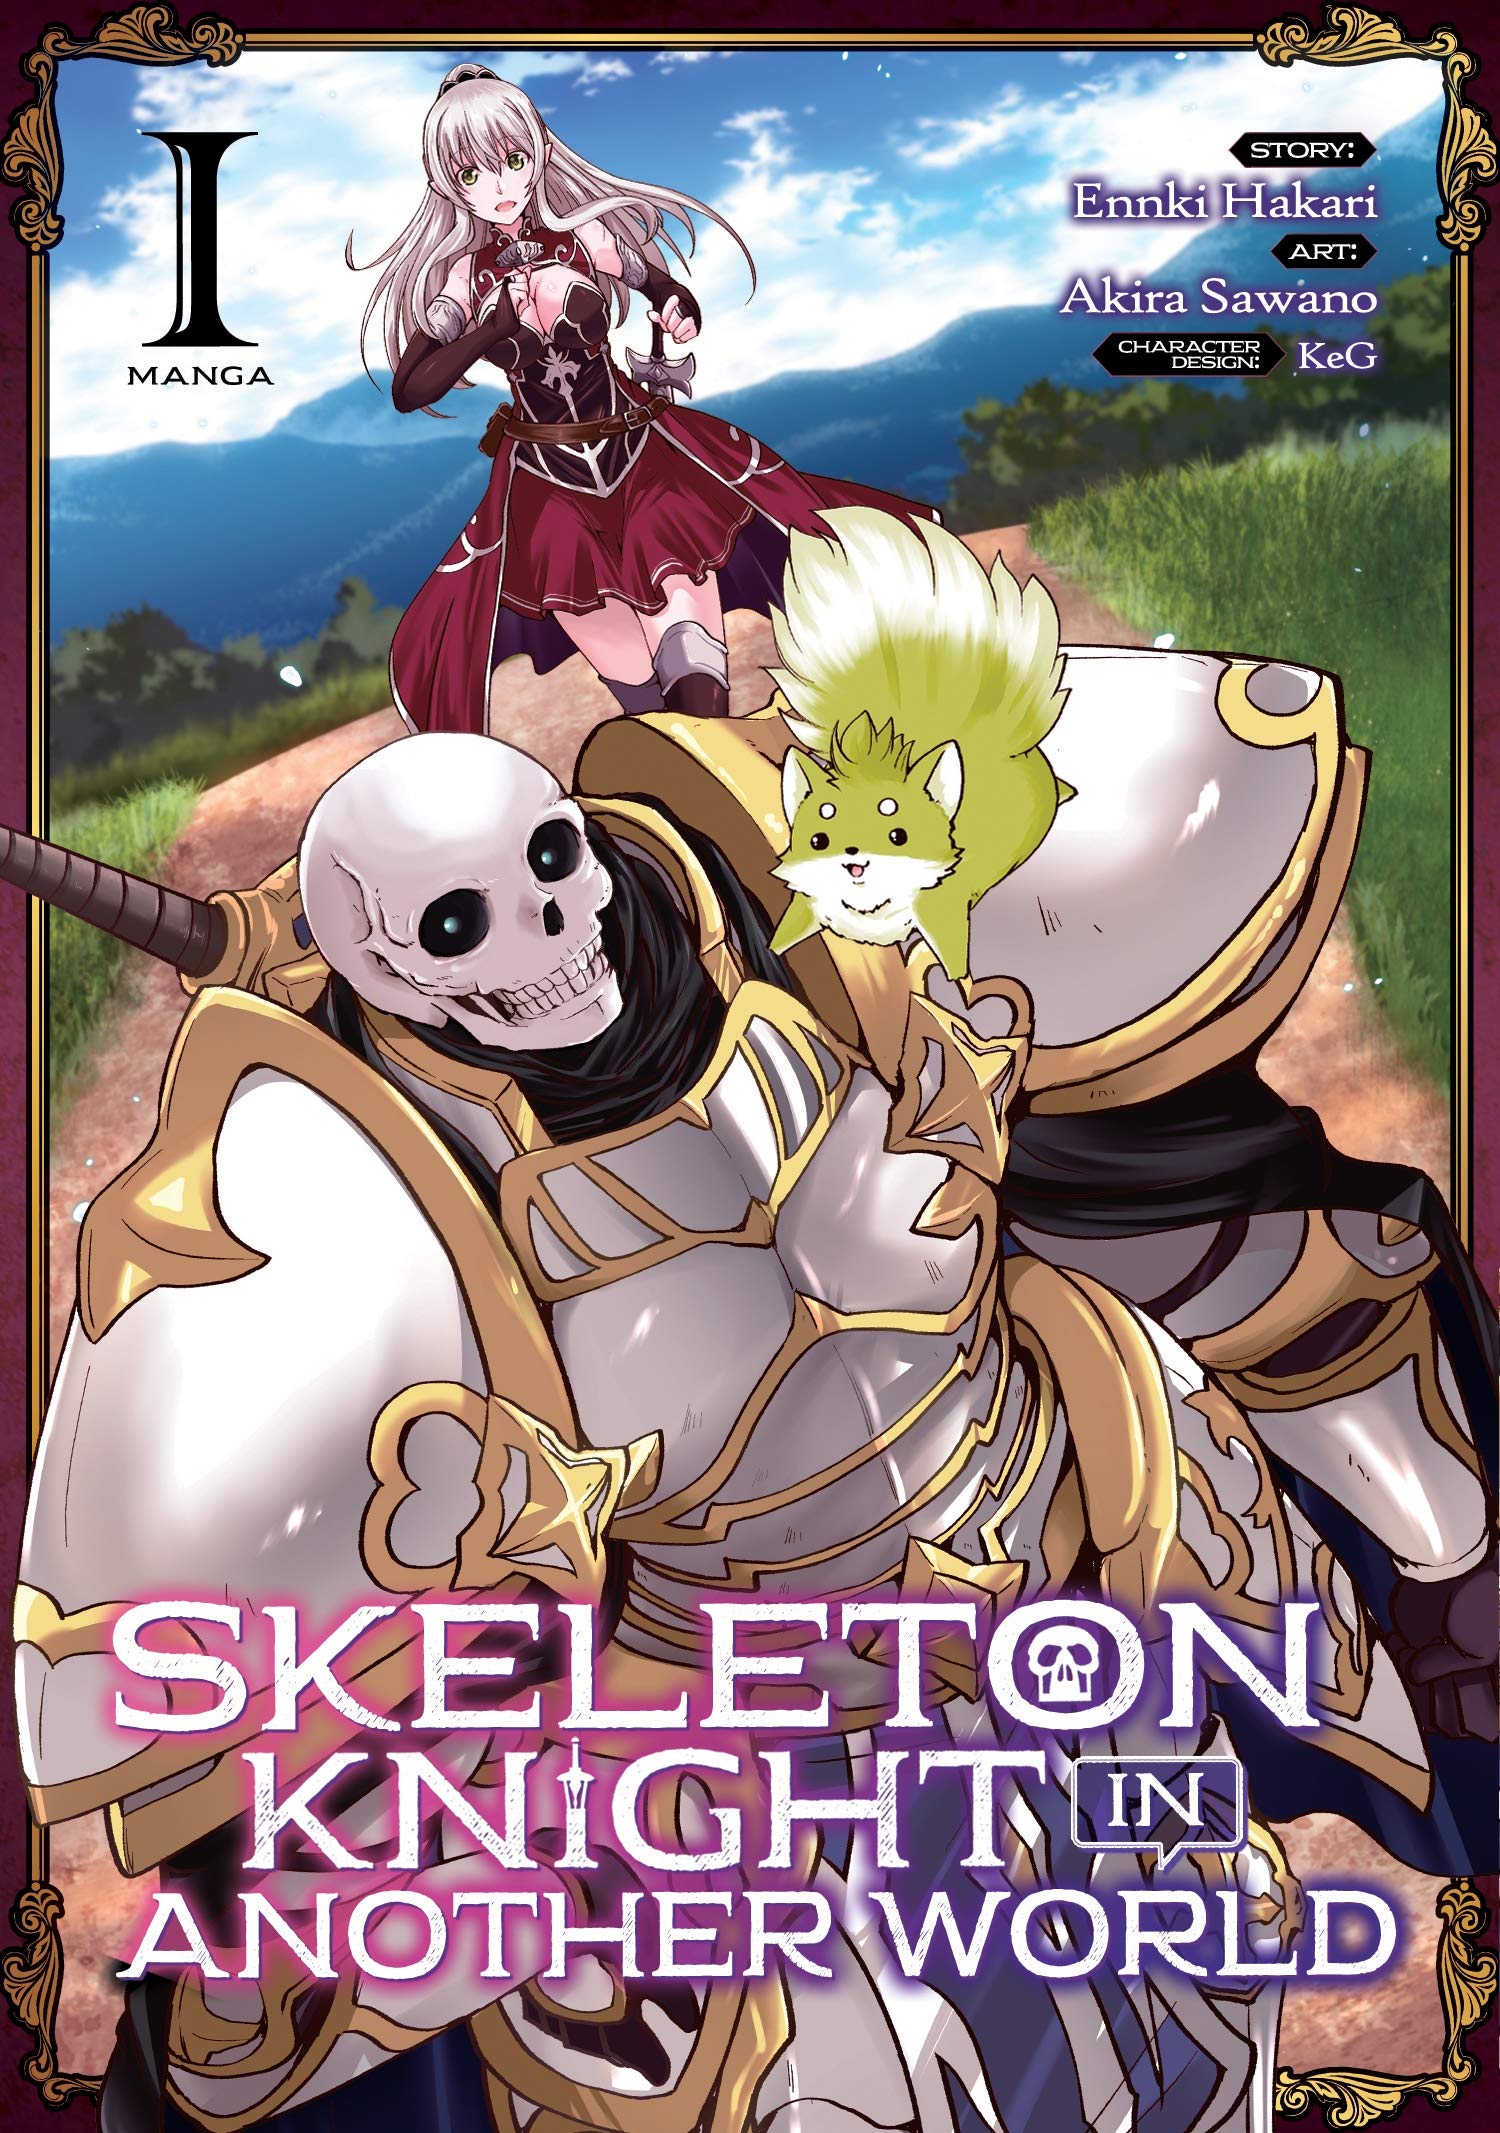 ○ Skeleton Knight in Another World ○